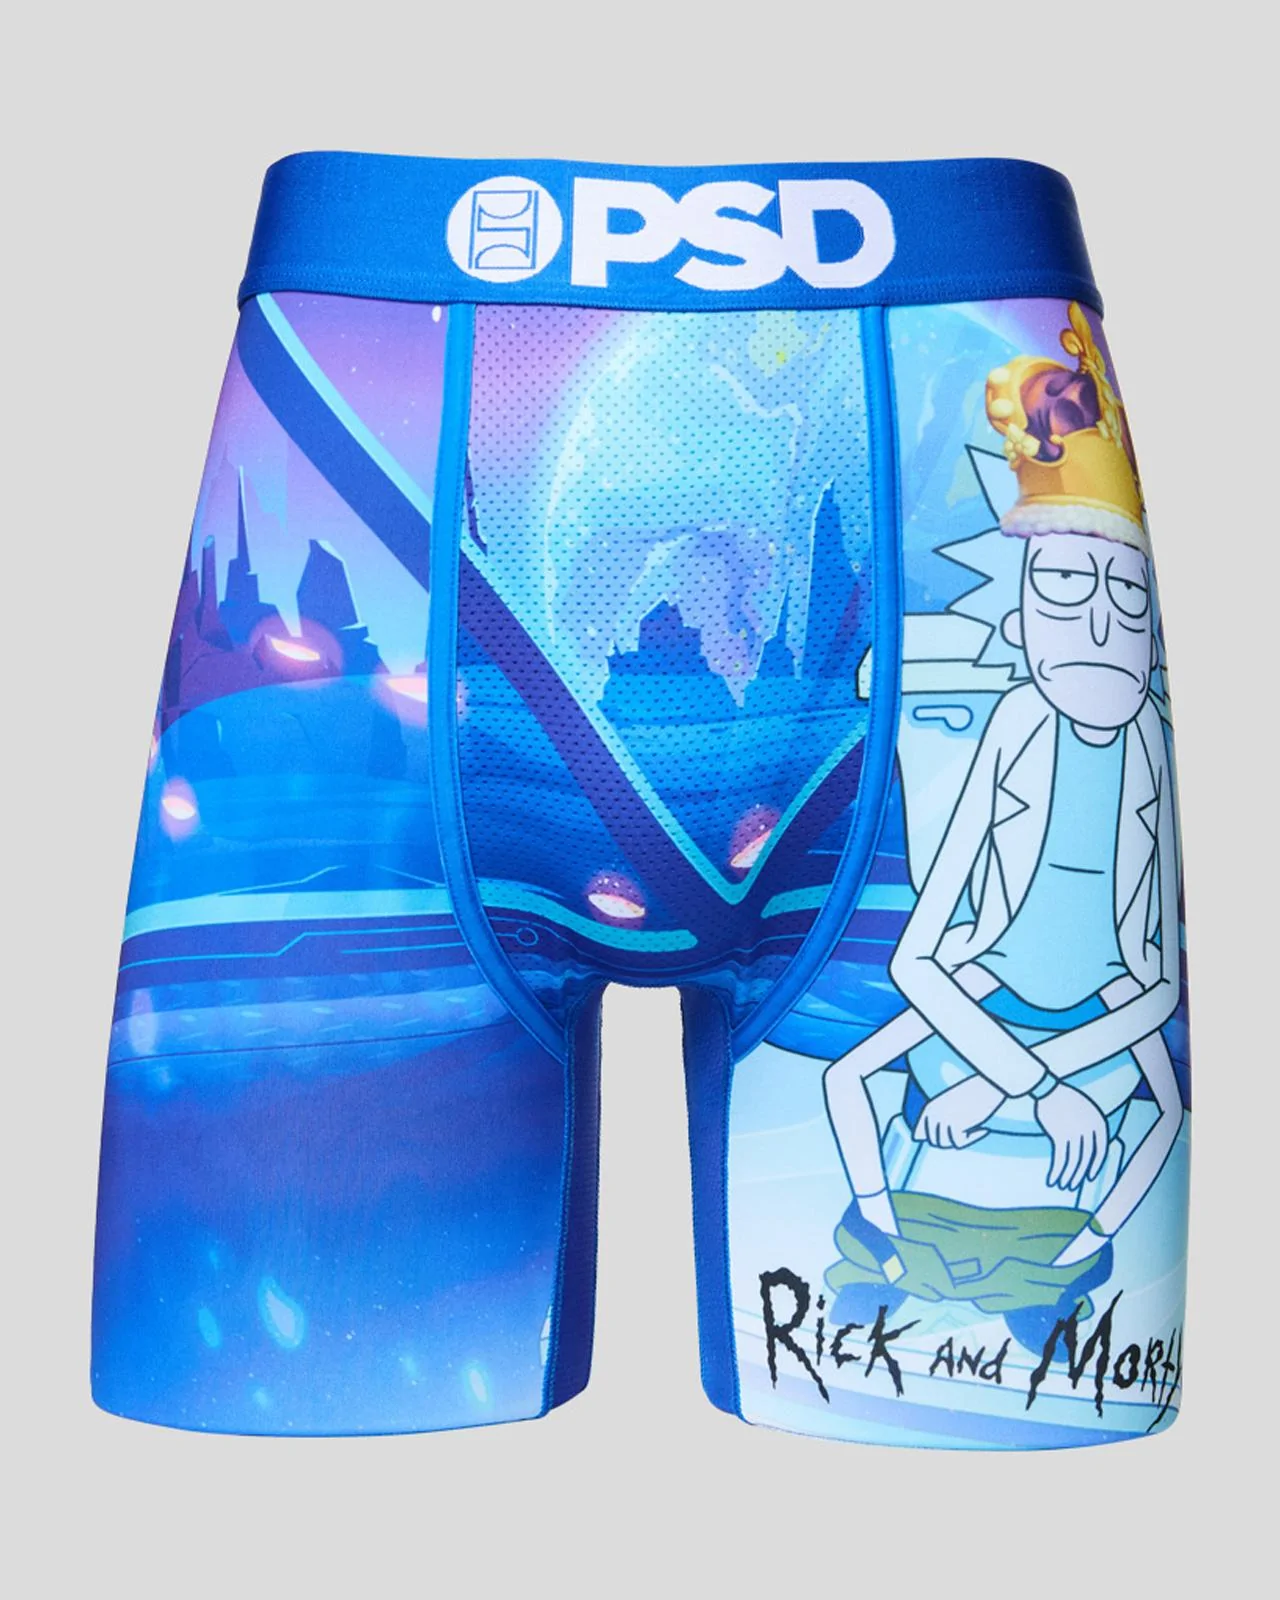 RICK AND MORTY - KING SHIT Boxer Brief - PSD Underwear